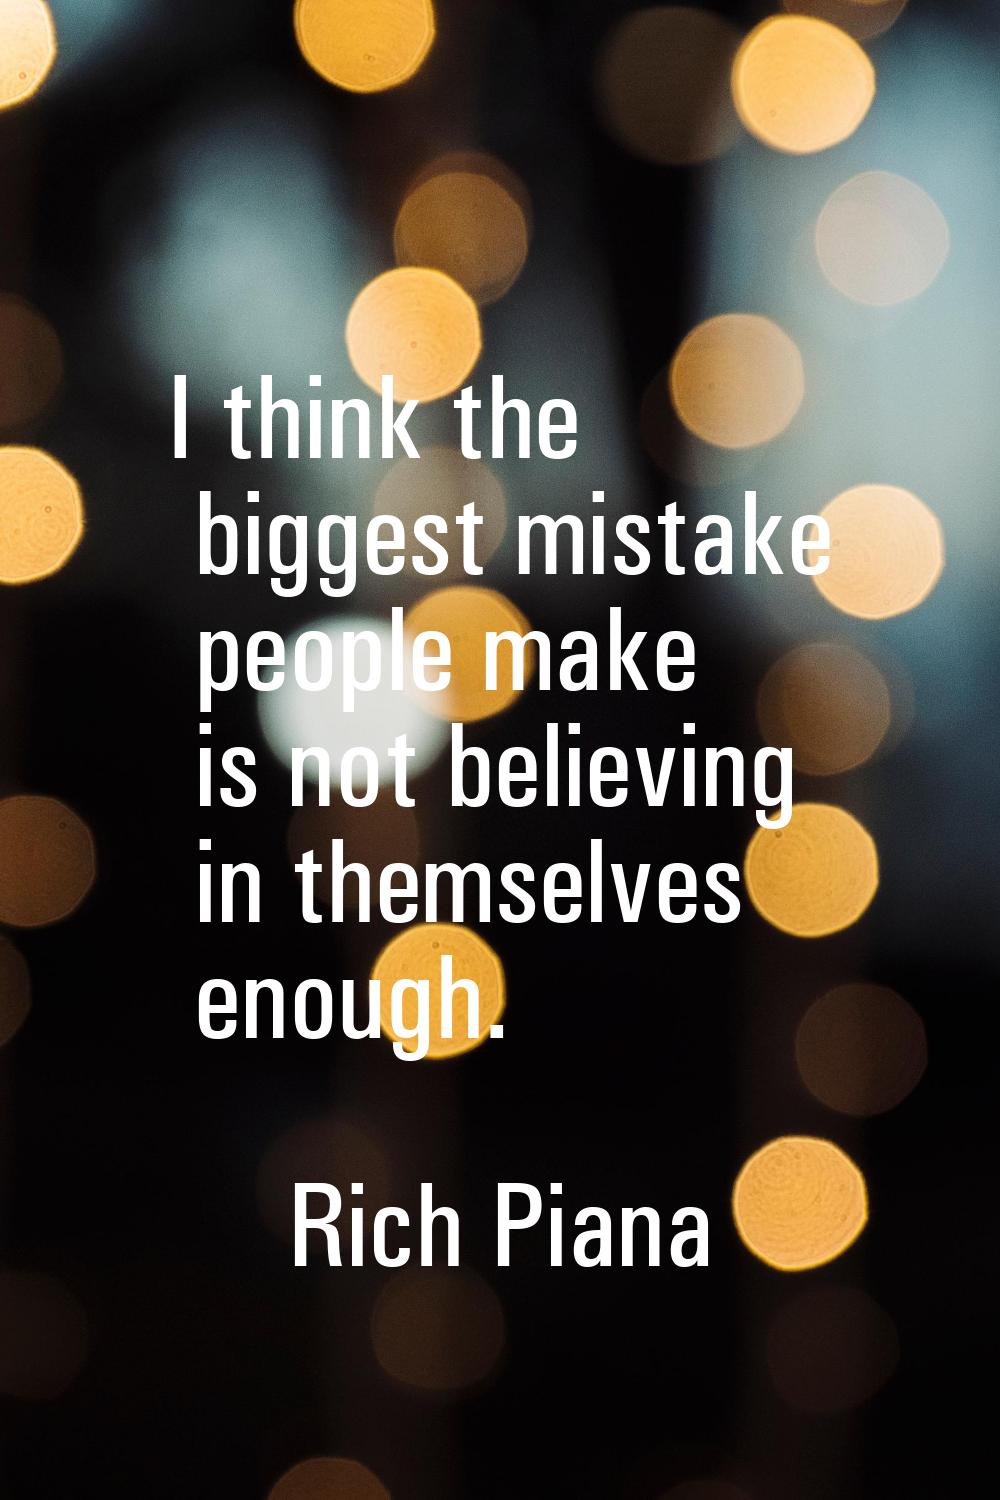 I think the biggest mistake people make is not believing in themselves enough.